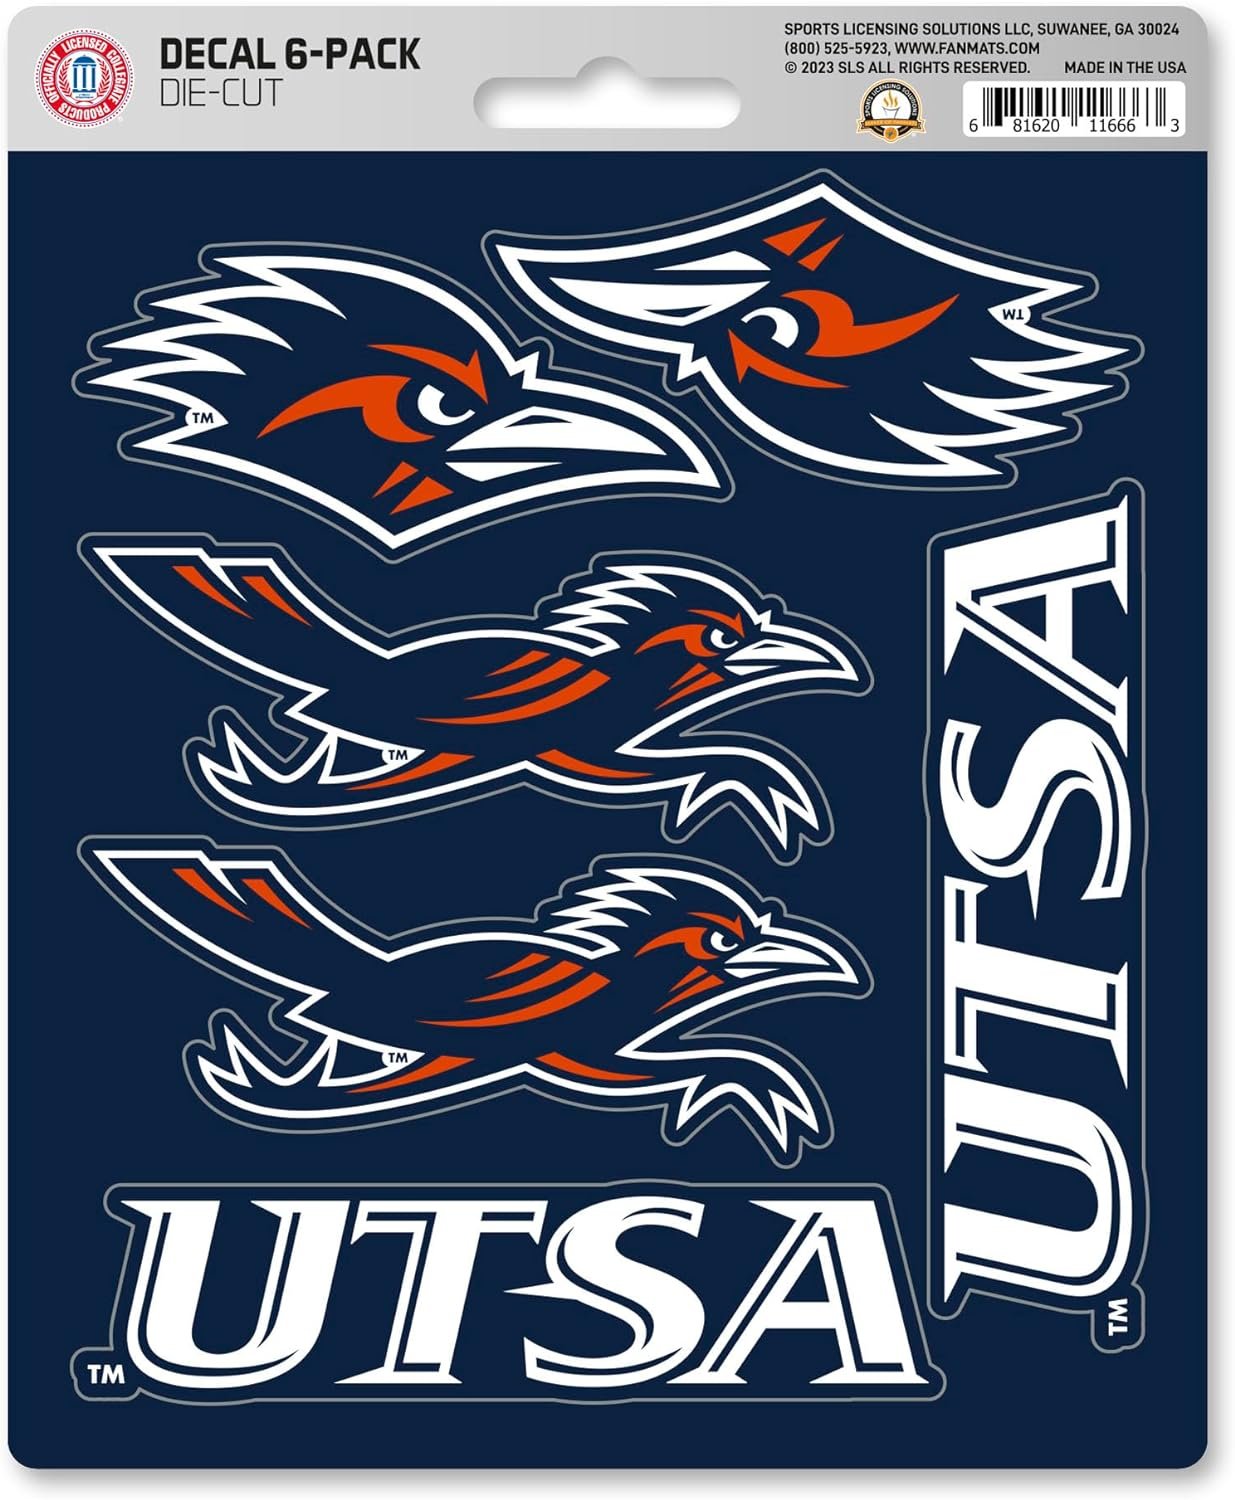 University of Texas San Antonio UTSA Roadrunners 6-Piece Decal Sticker Set, 5x6 Inch Sheet, Gift for football fans for any hard surfaces around home, automotive, personal items